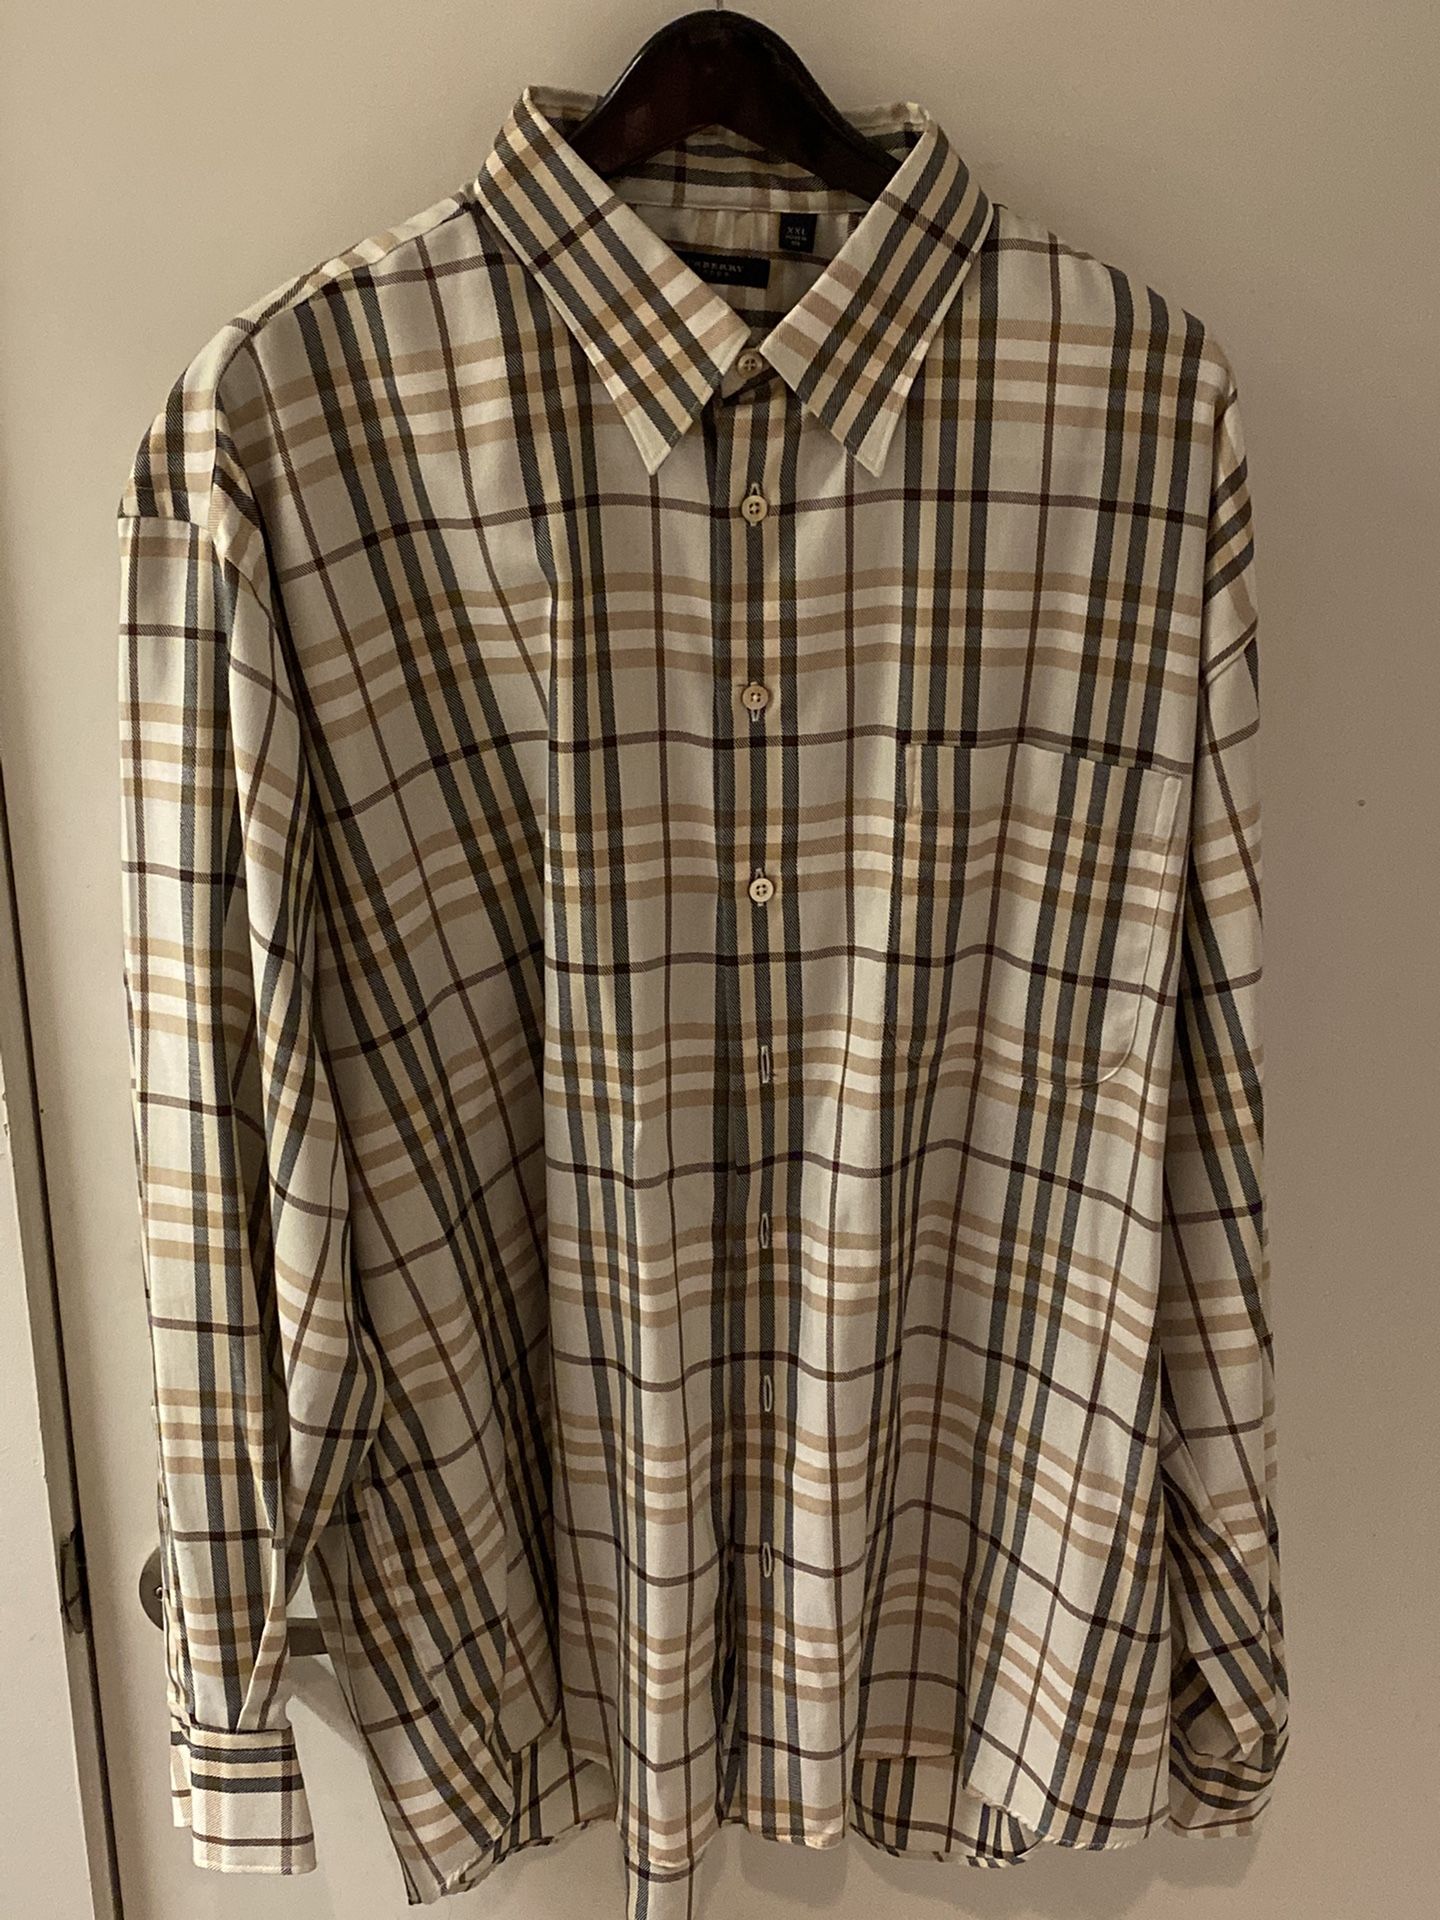 Burberry Long Sleeve Shirt XXL only worn once. Excellent Condition-Like New.